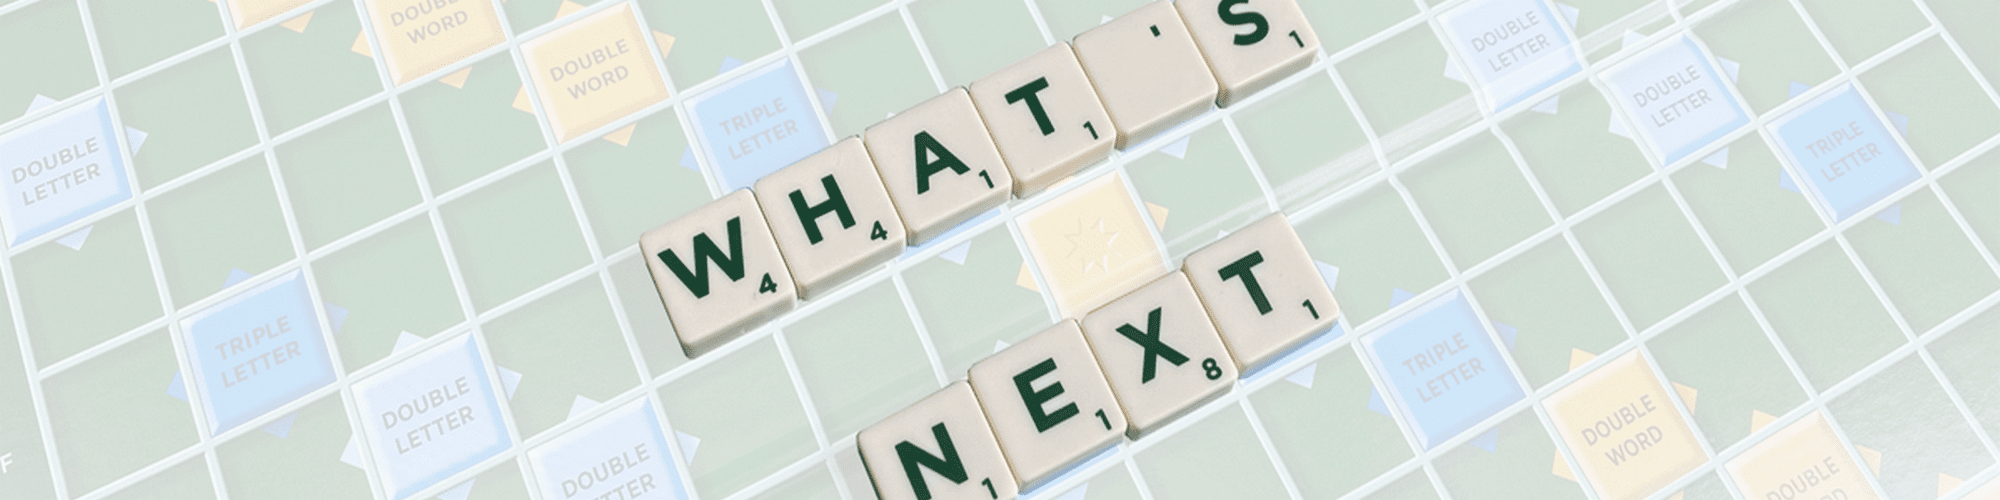 What's Next made with scrabble tiles